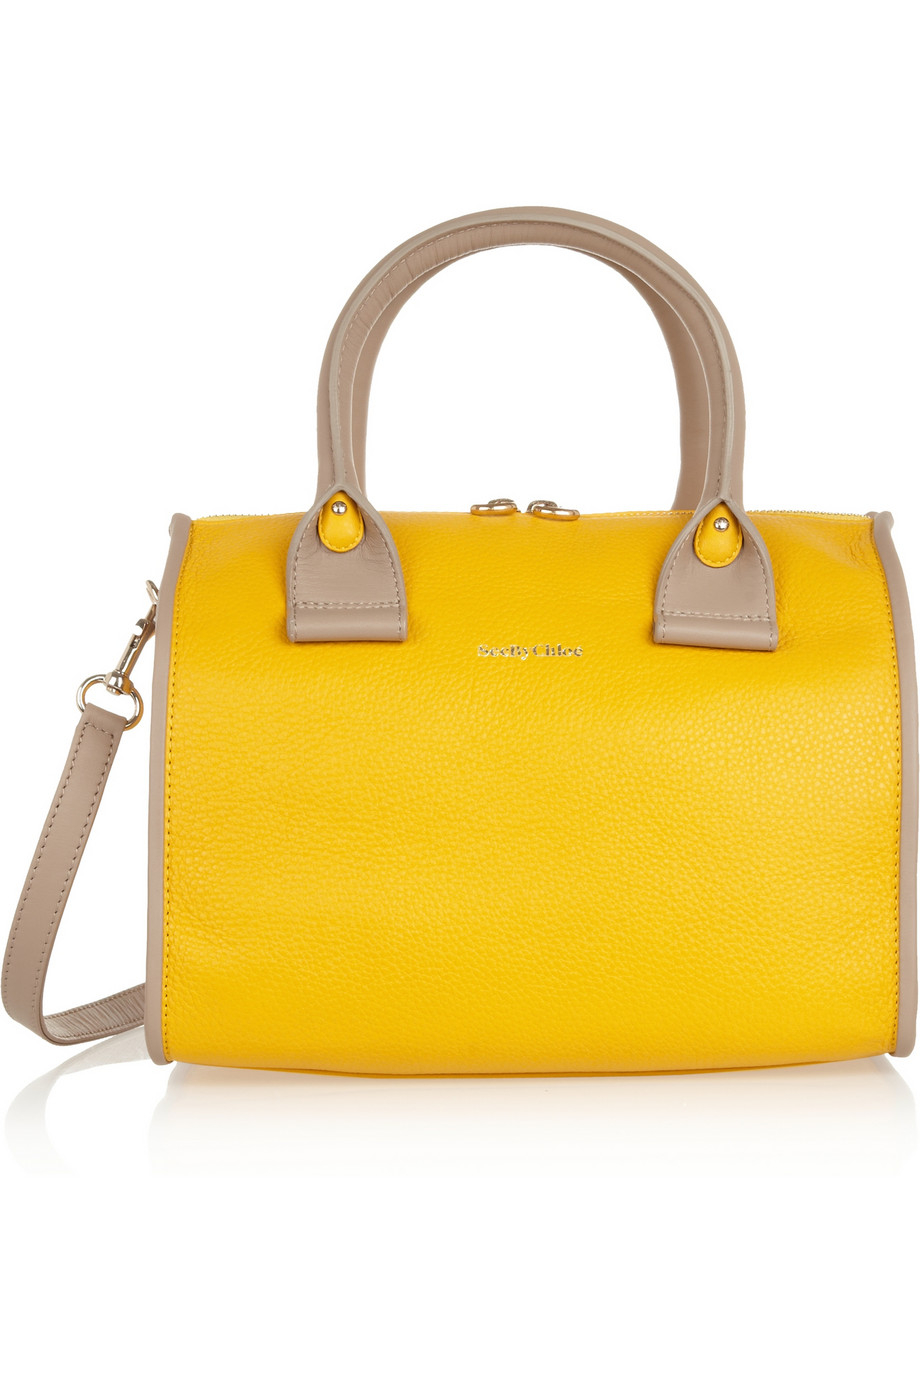 See by chlo April Texturedleather Duffle Bag in Yellow (silver ...